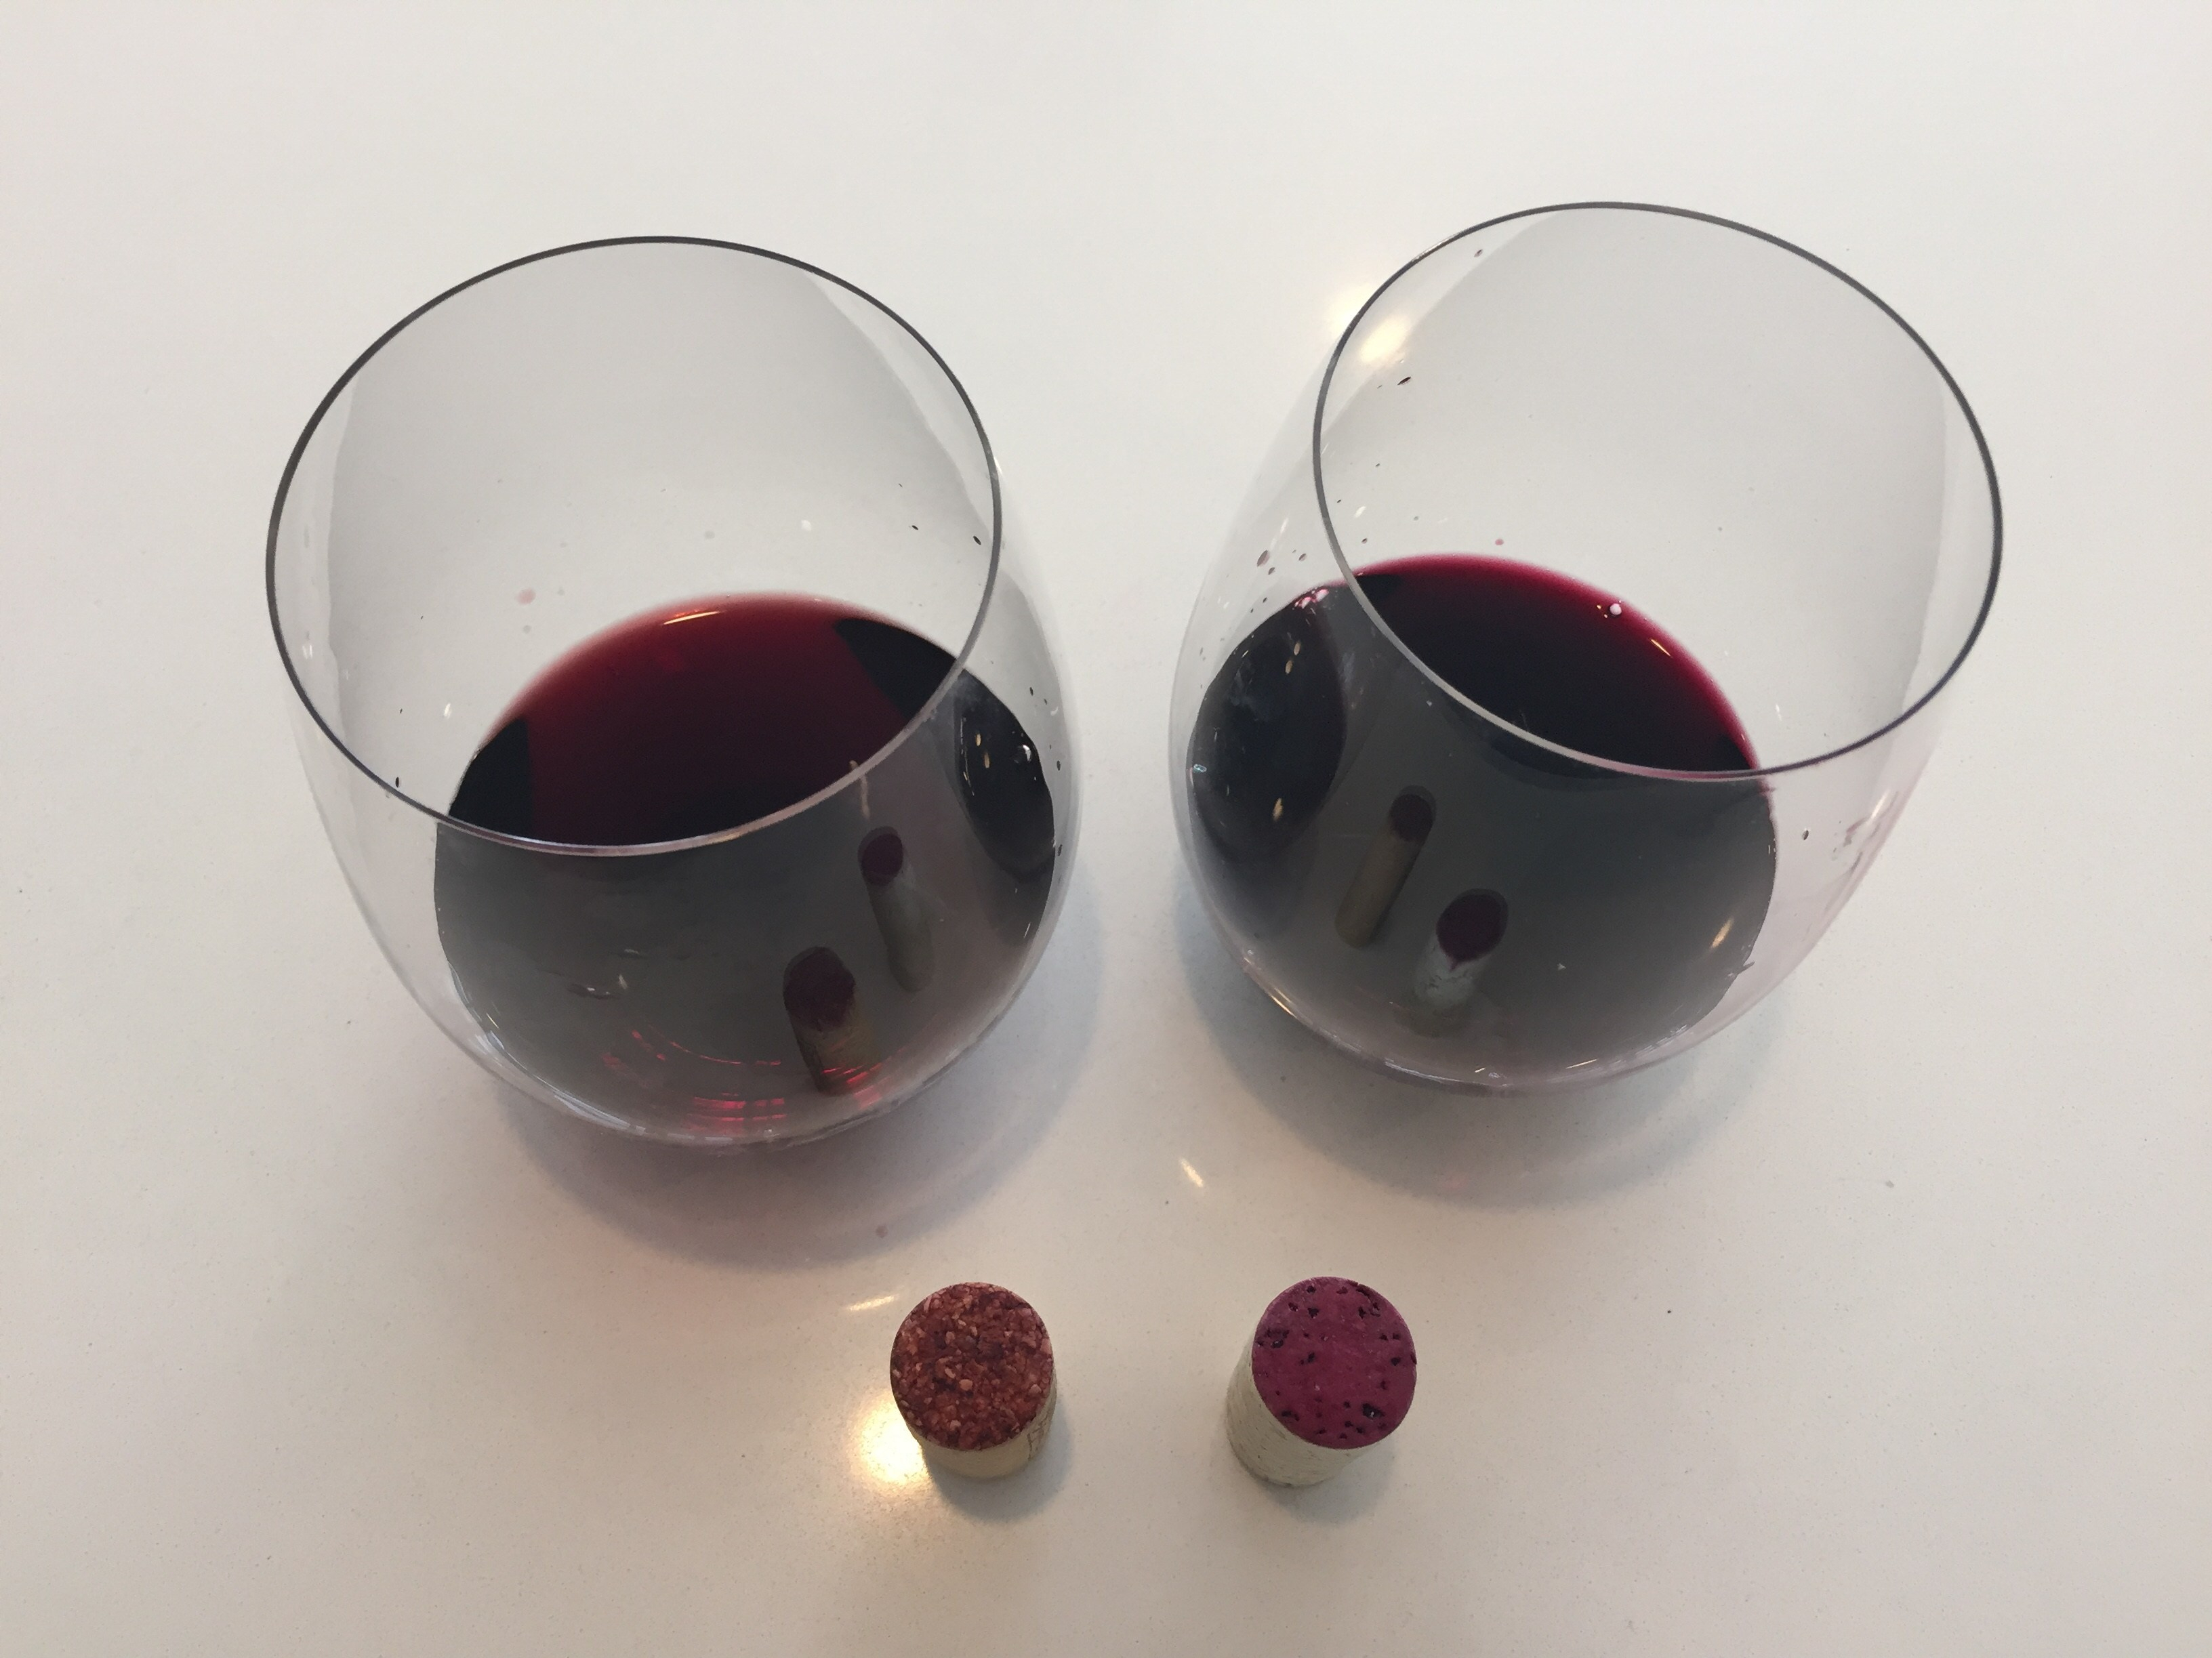 A glass of the brick red 2016 Kirkland Signature on the left, and a glass of the electric red/purple 2017 TJ's Reserve on the right.